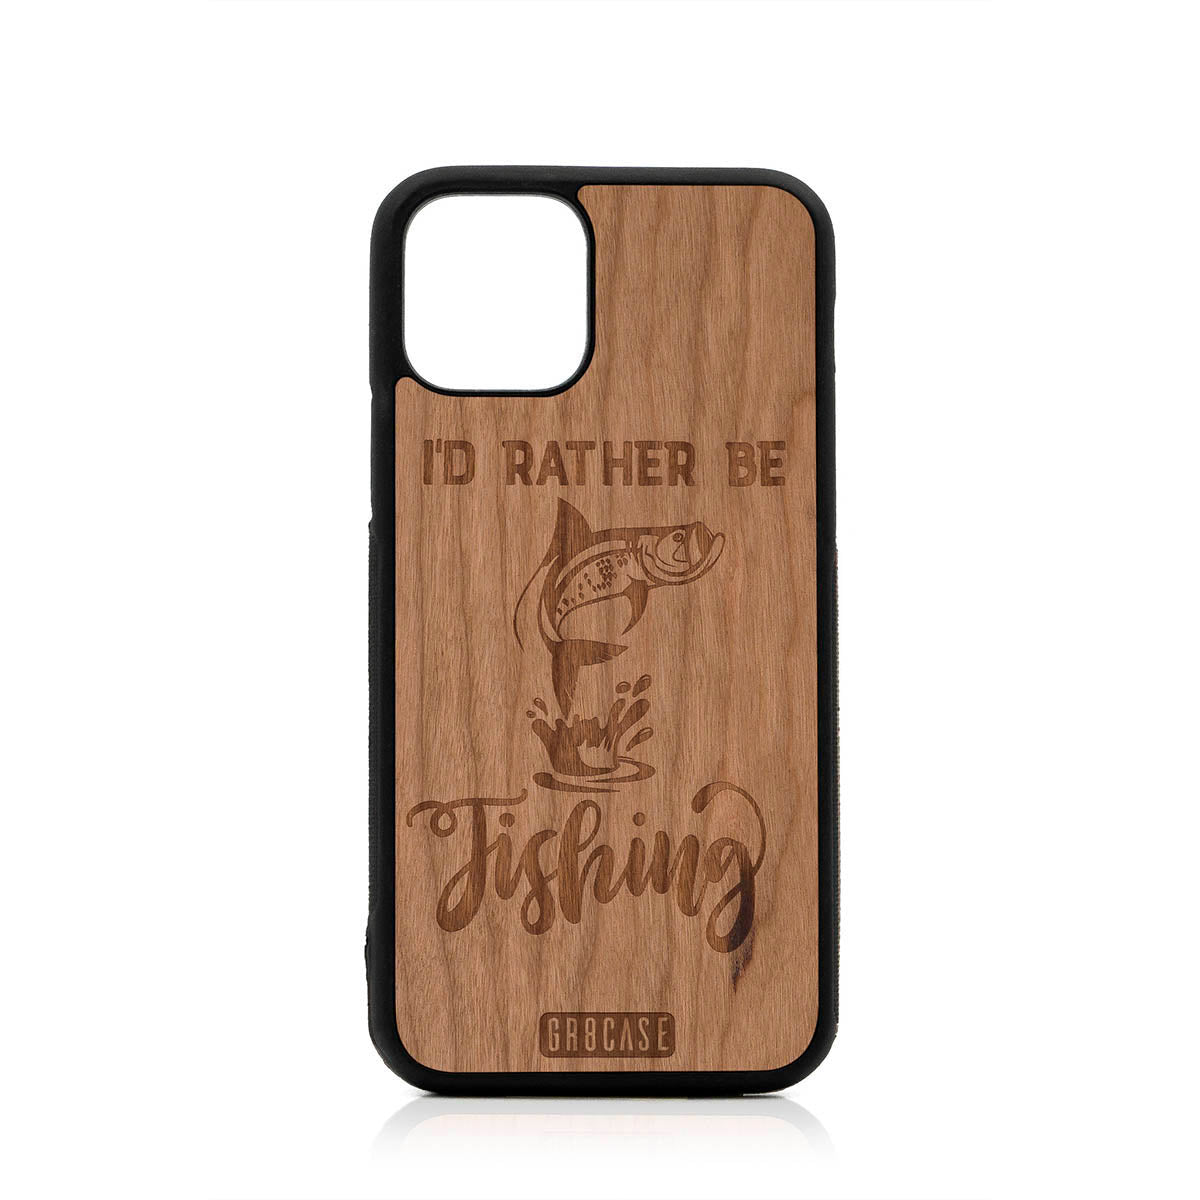 I'D Rather Be Fishing Design Wood Case For iPhone 11 Pro